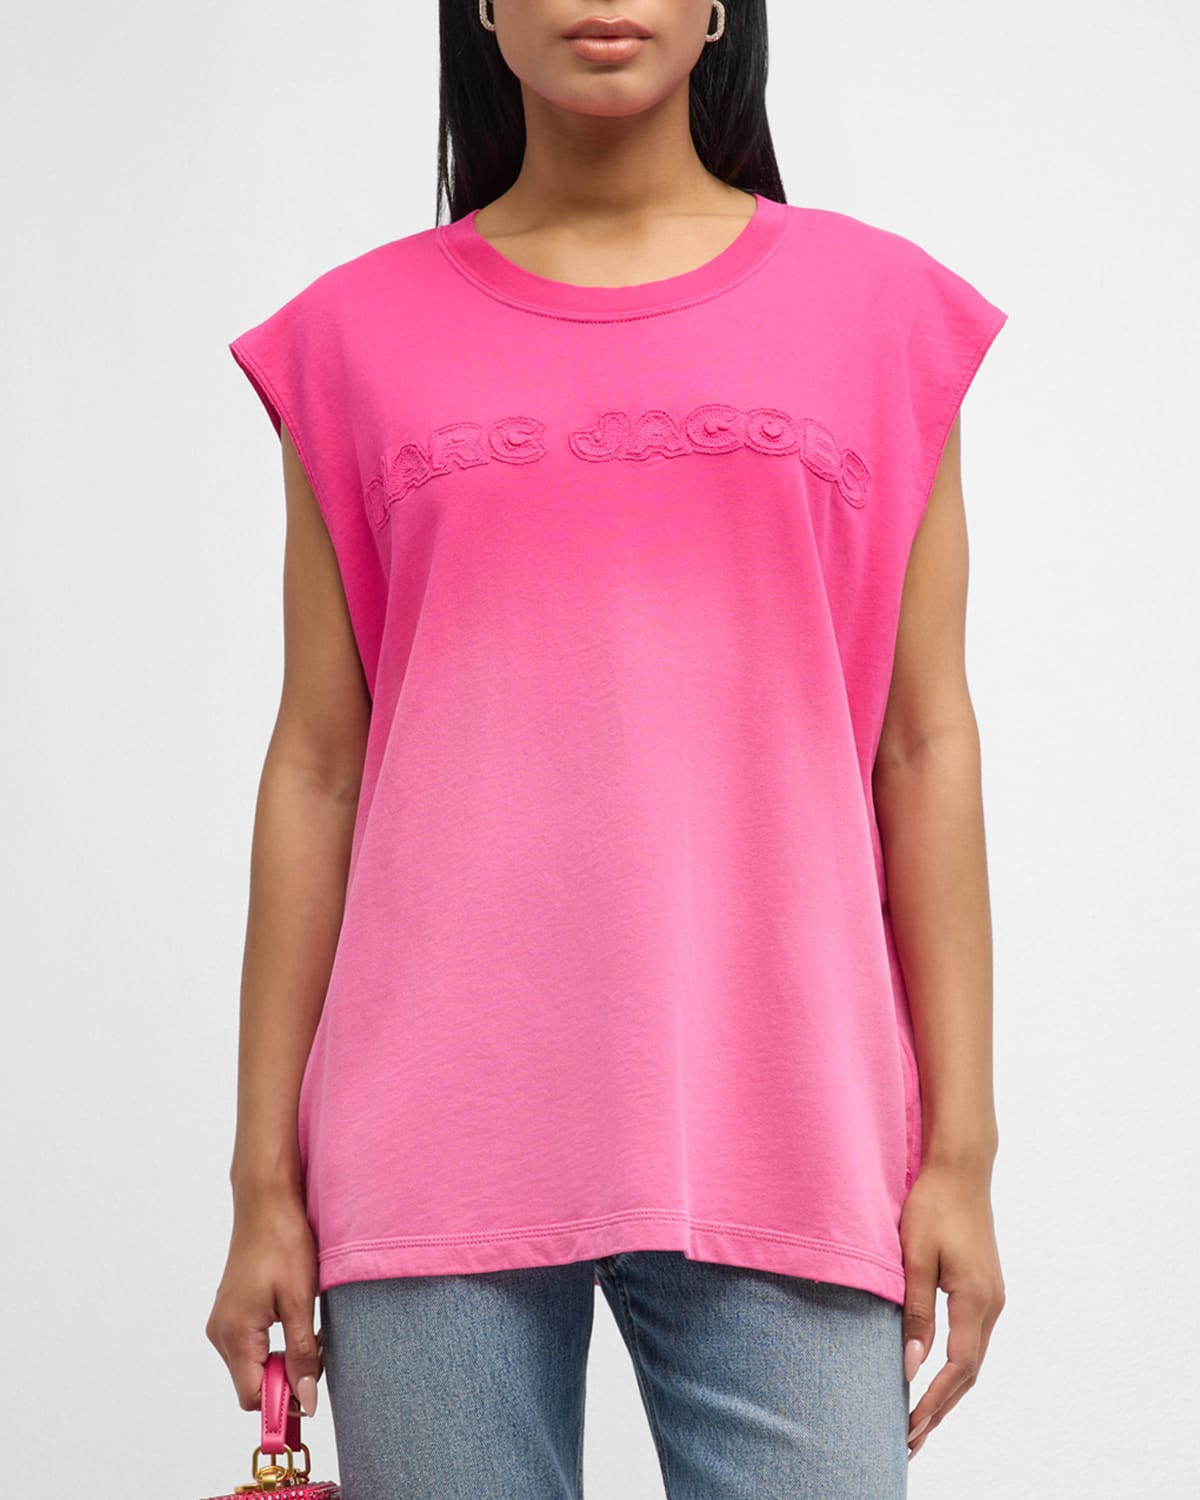 Marc Jacobs Grunge Spray Logo Muscle Tee In Hot Pink